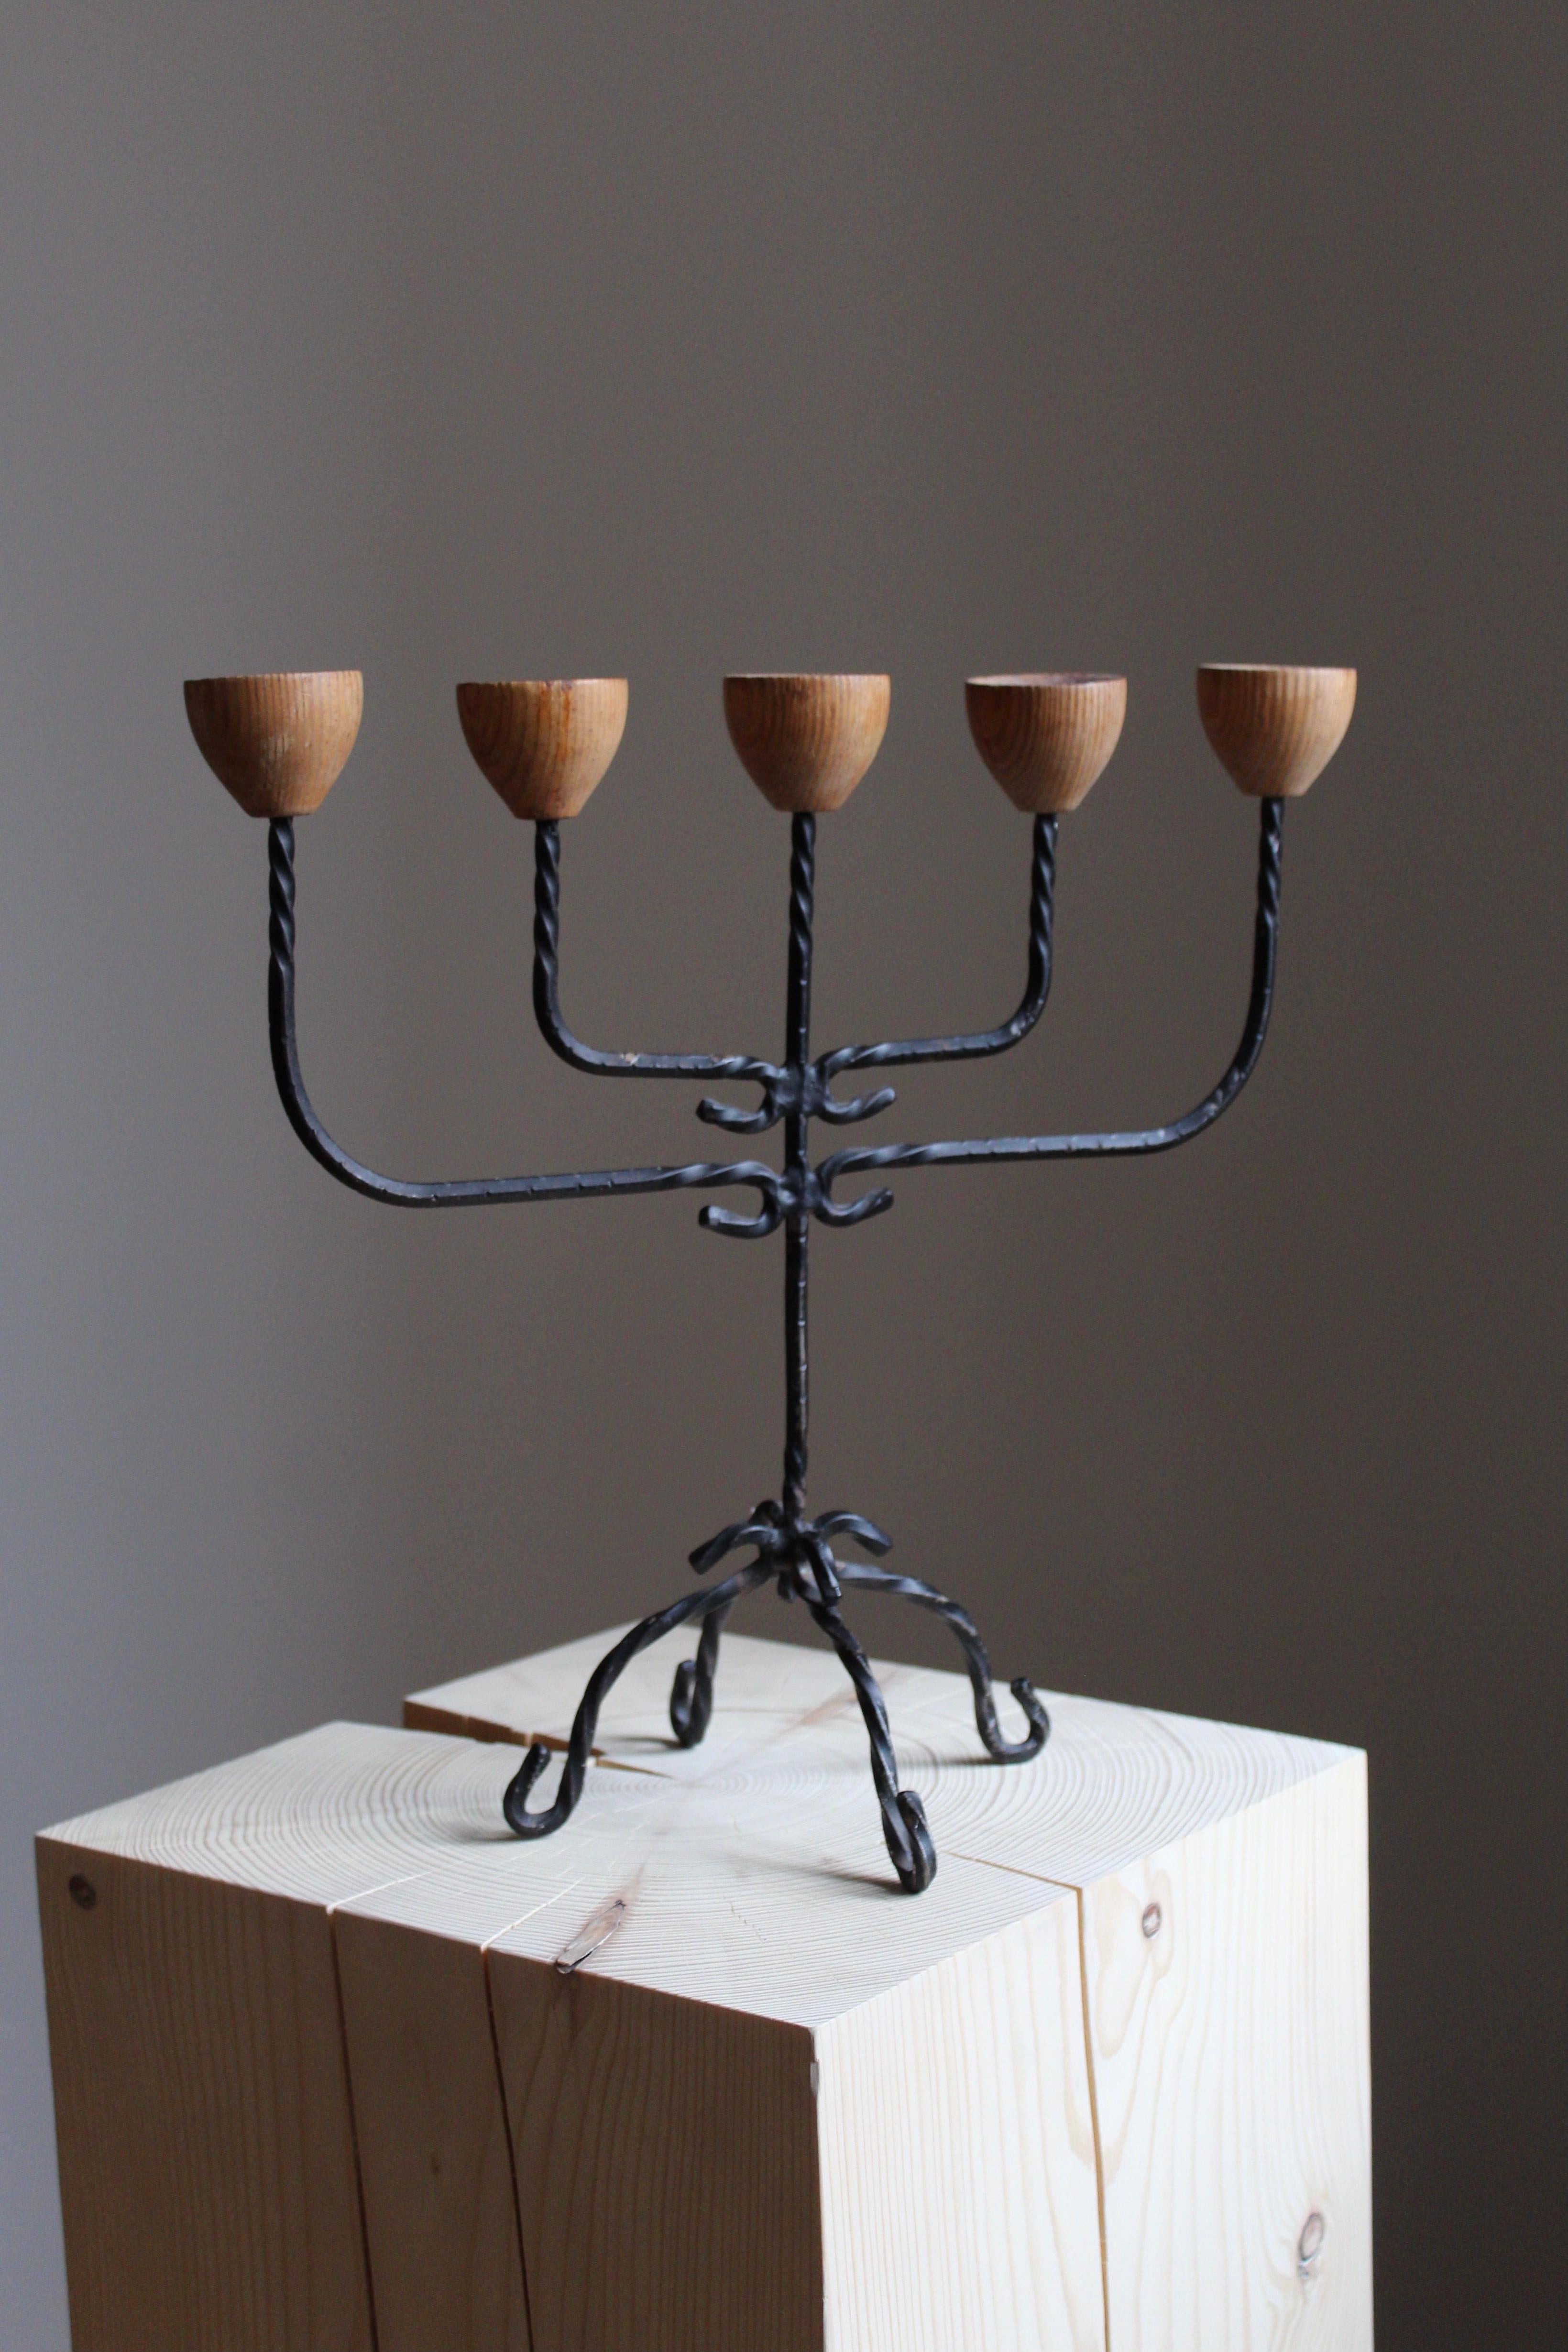 A sculptural candelabra. Crafted in wrought iron and solid turned oak nossles. 

Other designers of the period include Diego Giacometti, Josef Frank, Piet Hein.